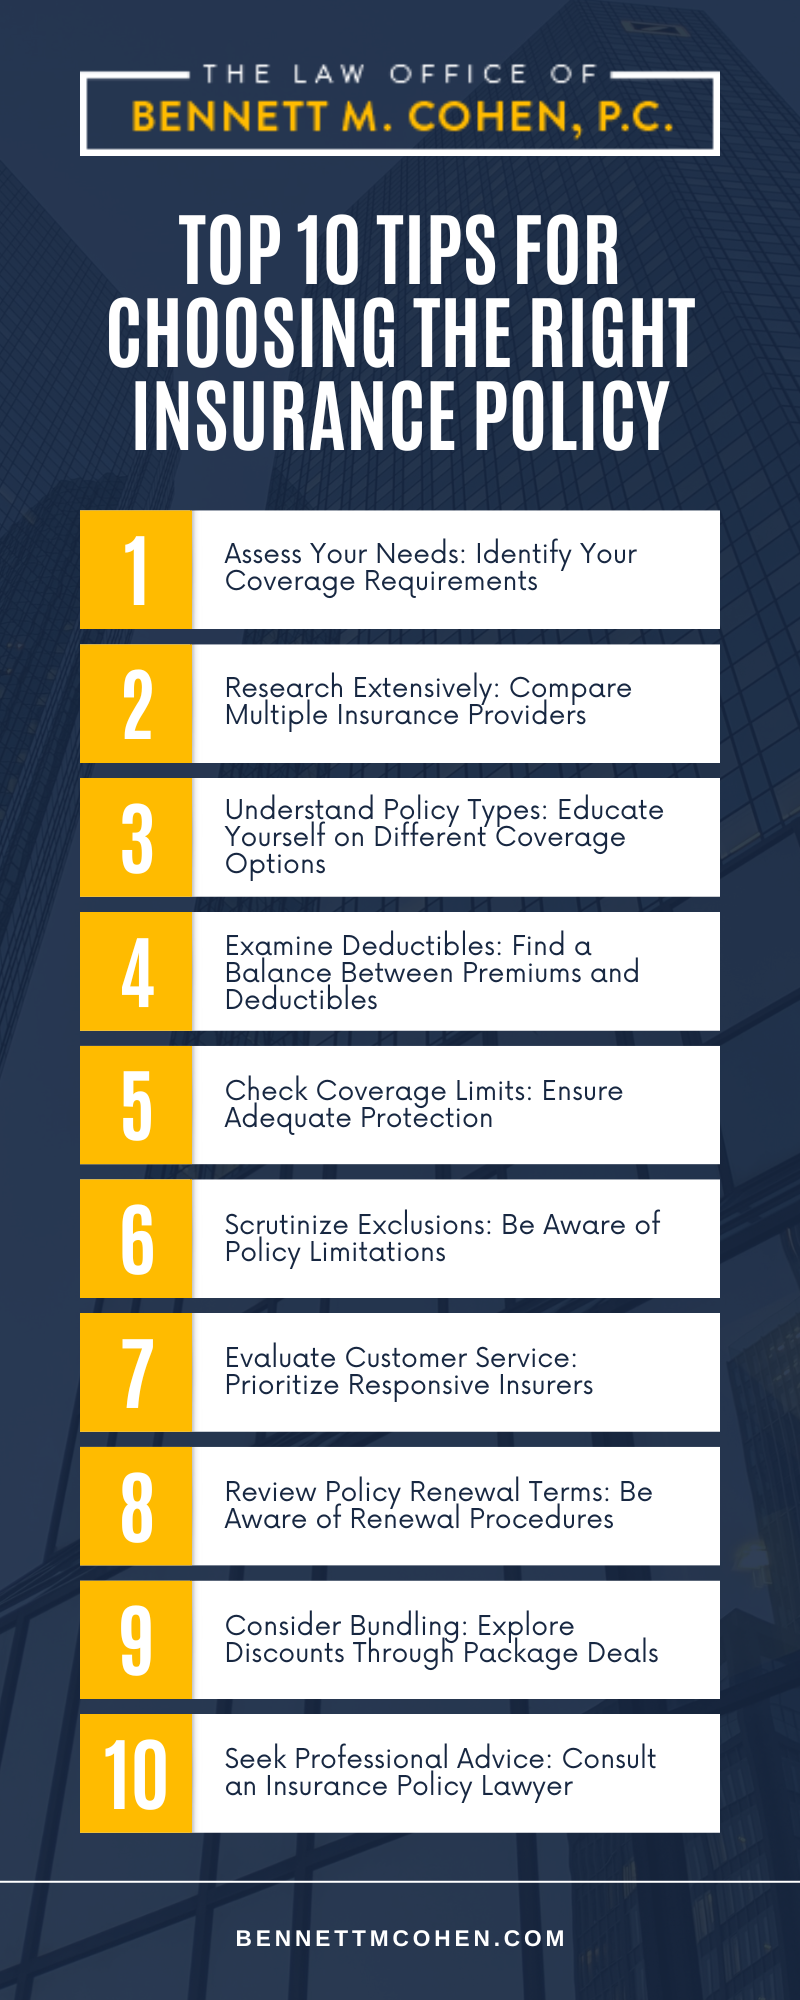 Top 10 Tips For Choosing The Right Insurance Policy Infographic